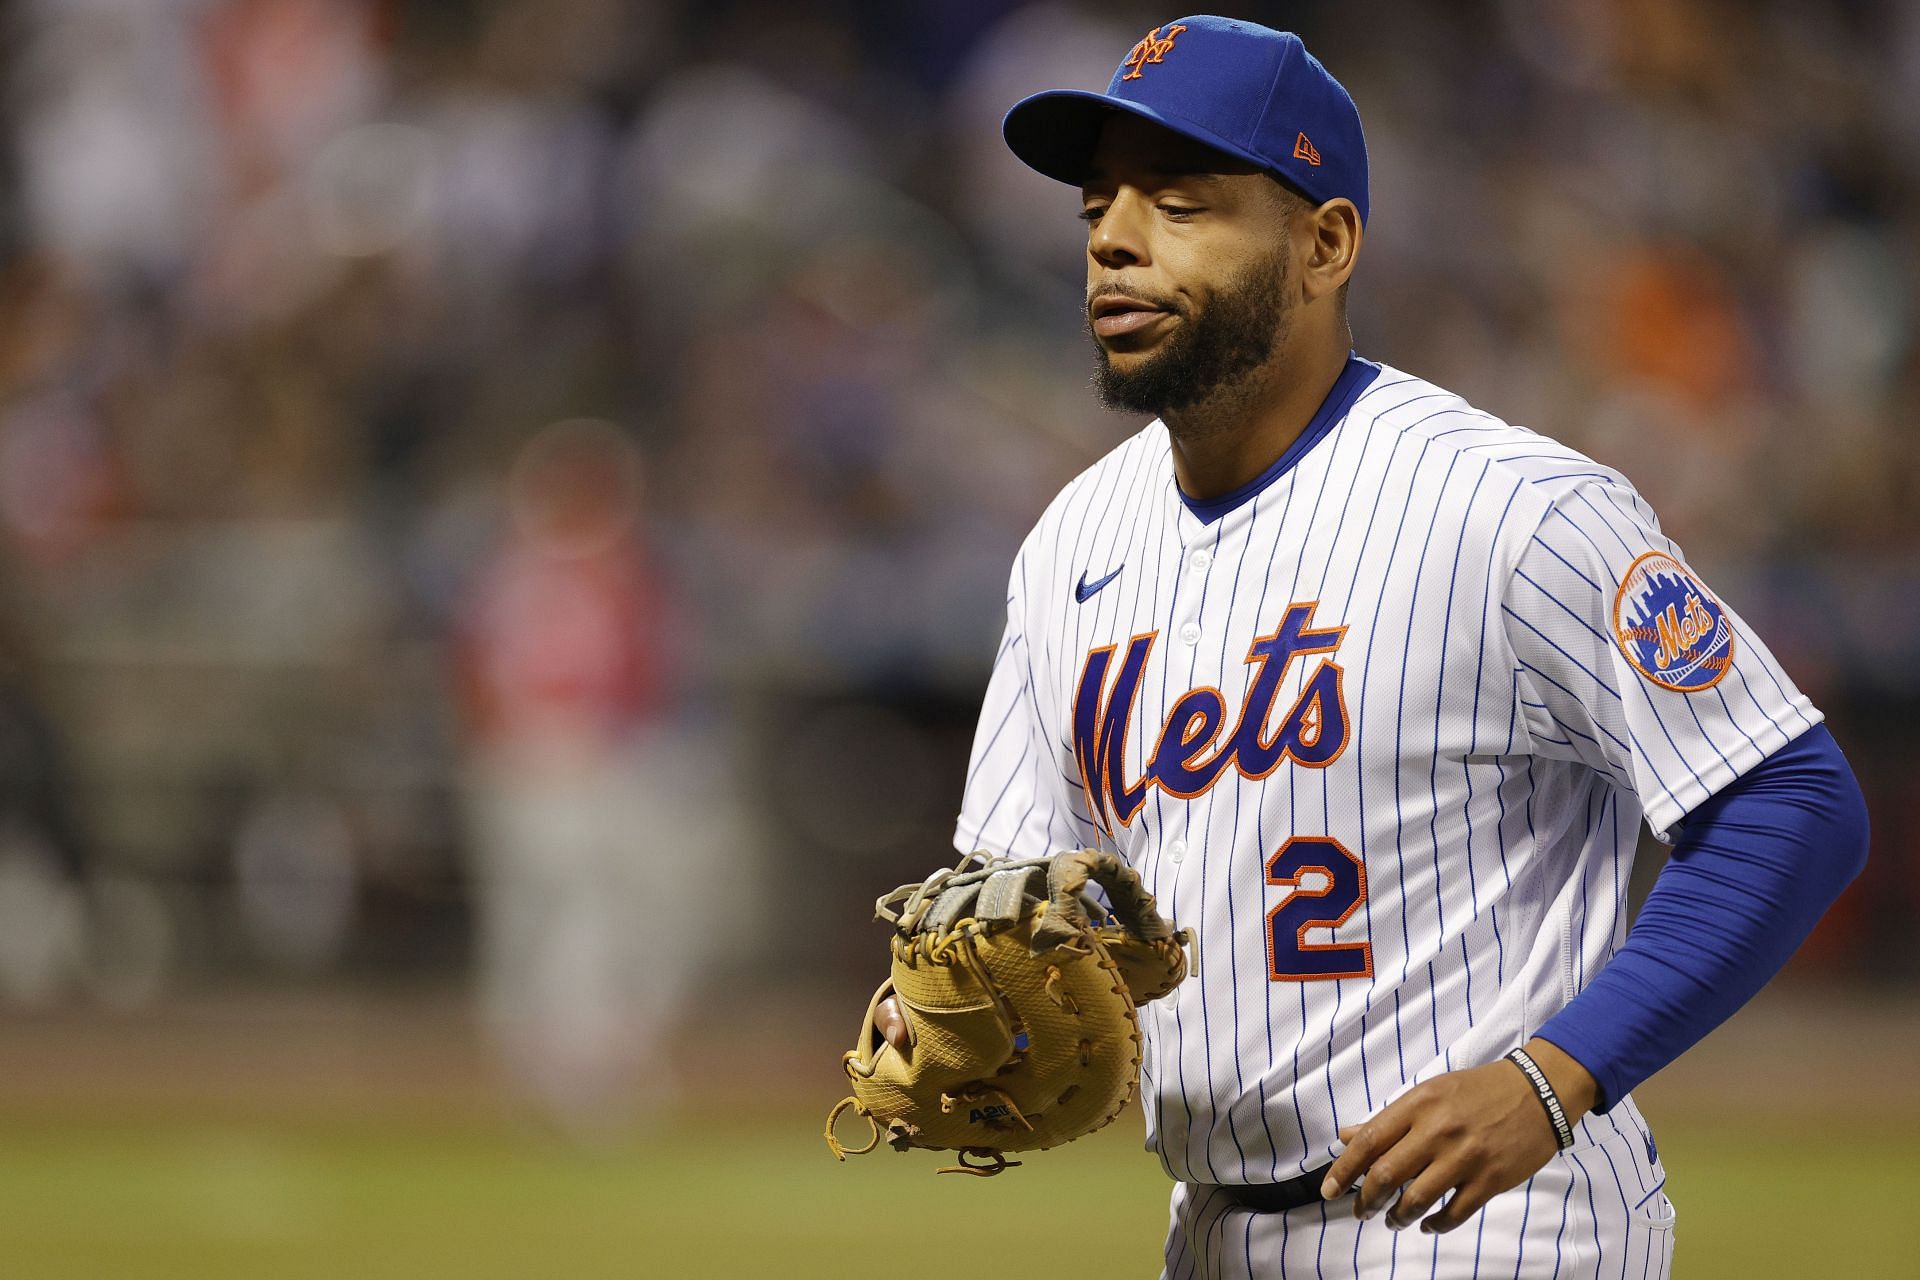 MLB Insider on New York Mets free agents "The Mets are said to be